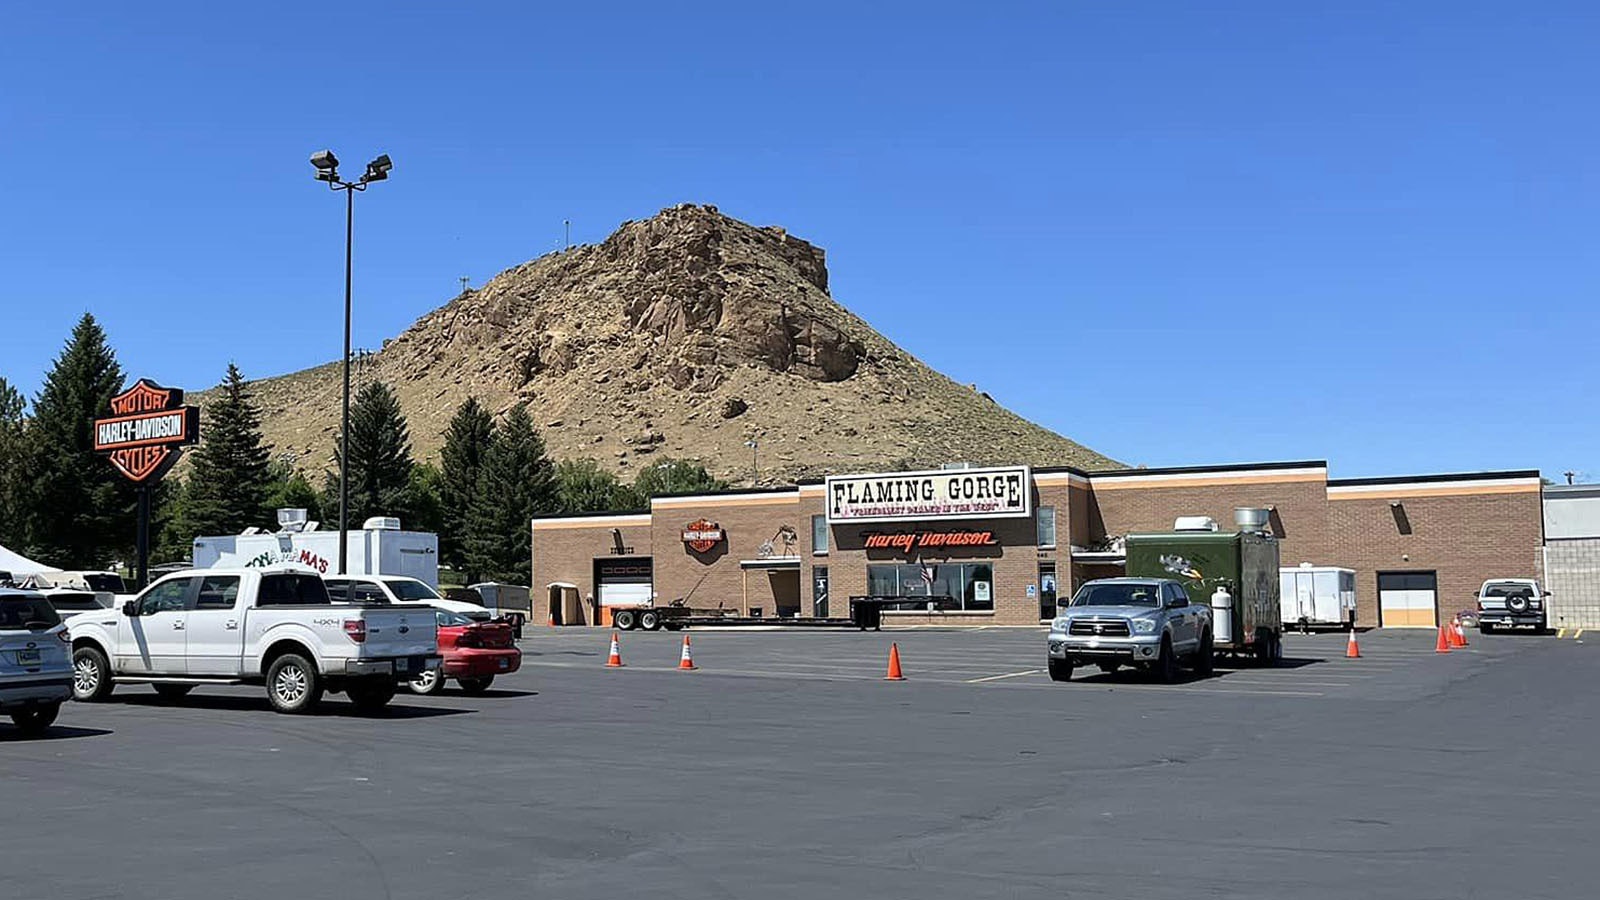 Flaming Gorge Harley Davidson in Green River will host the Hogs For Hope rally that will stop there before its final leg its trip from Austin, Texas, to the Green River Bar in Daniel, Wyoming.